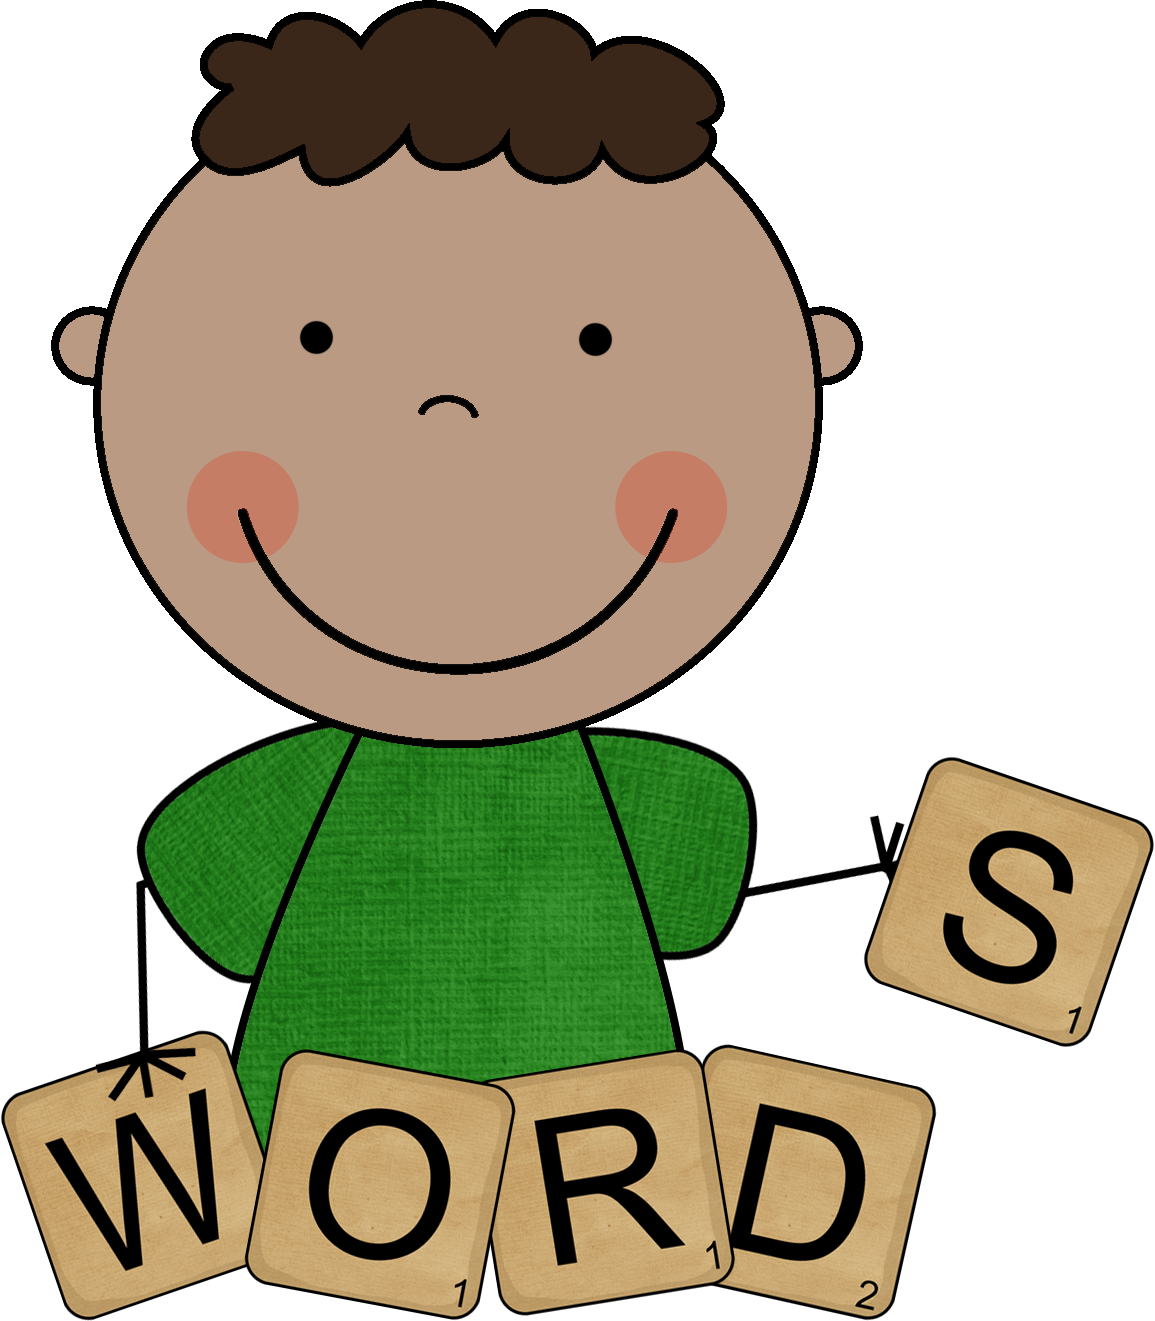 Vocabulary drawing at getdrawings. Teach clipart reading camp